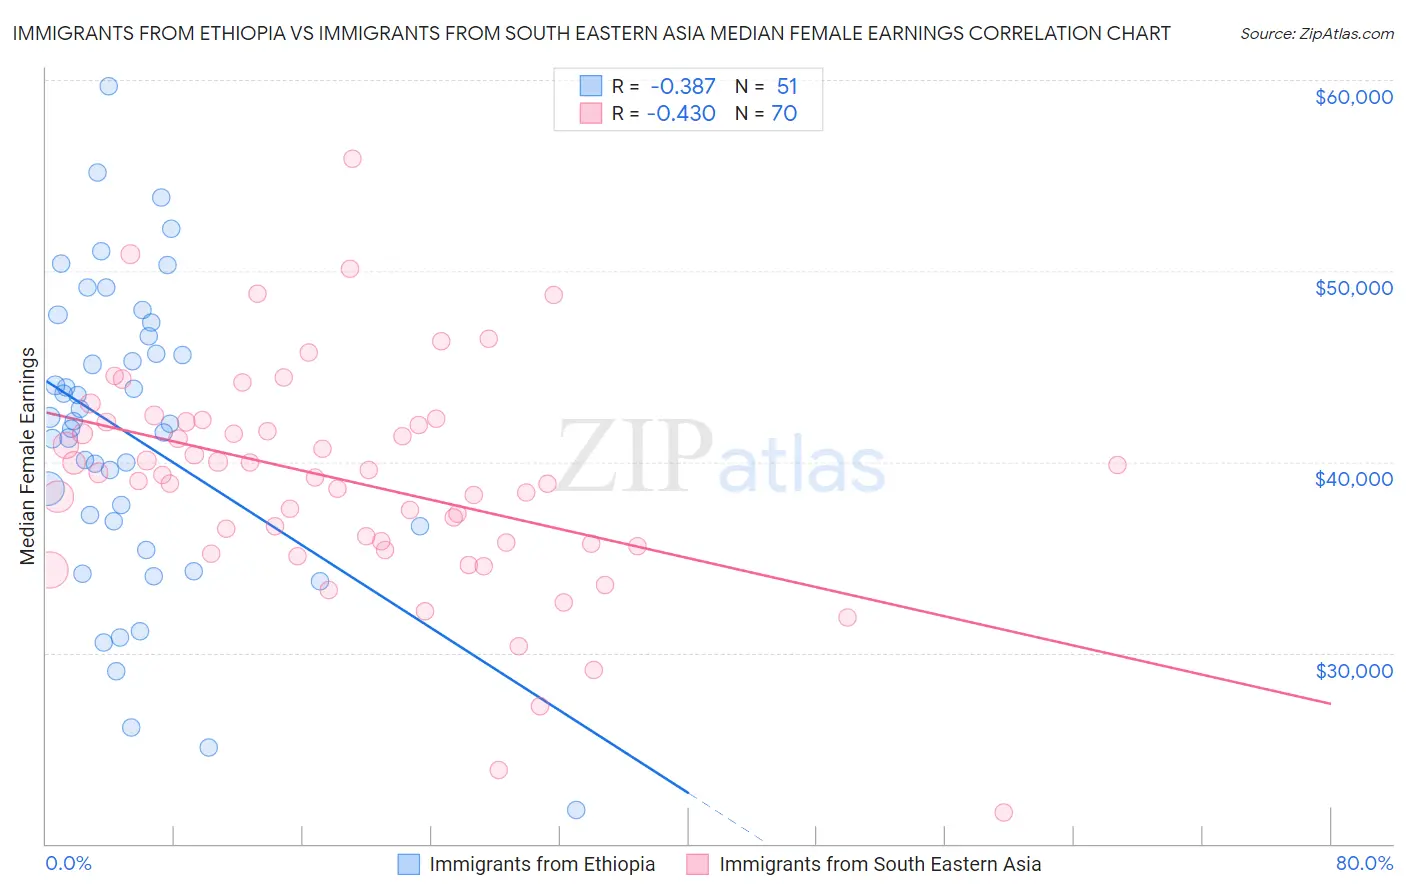 Immigrants from Ethiopia vs Immigrants from South Eastern Asia Median Female Earnings